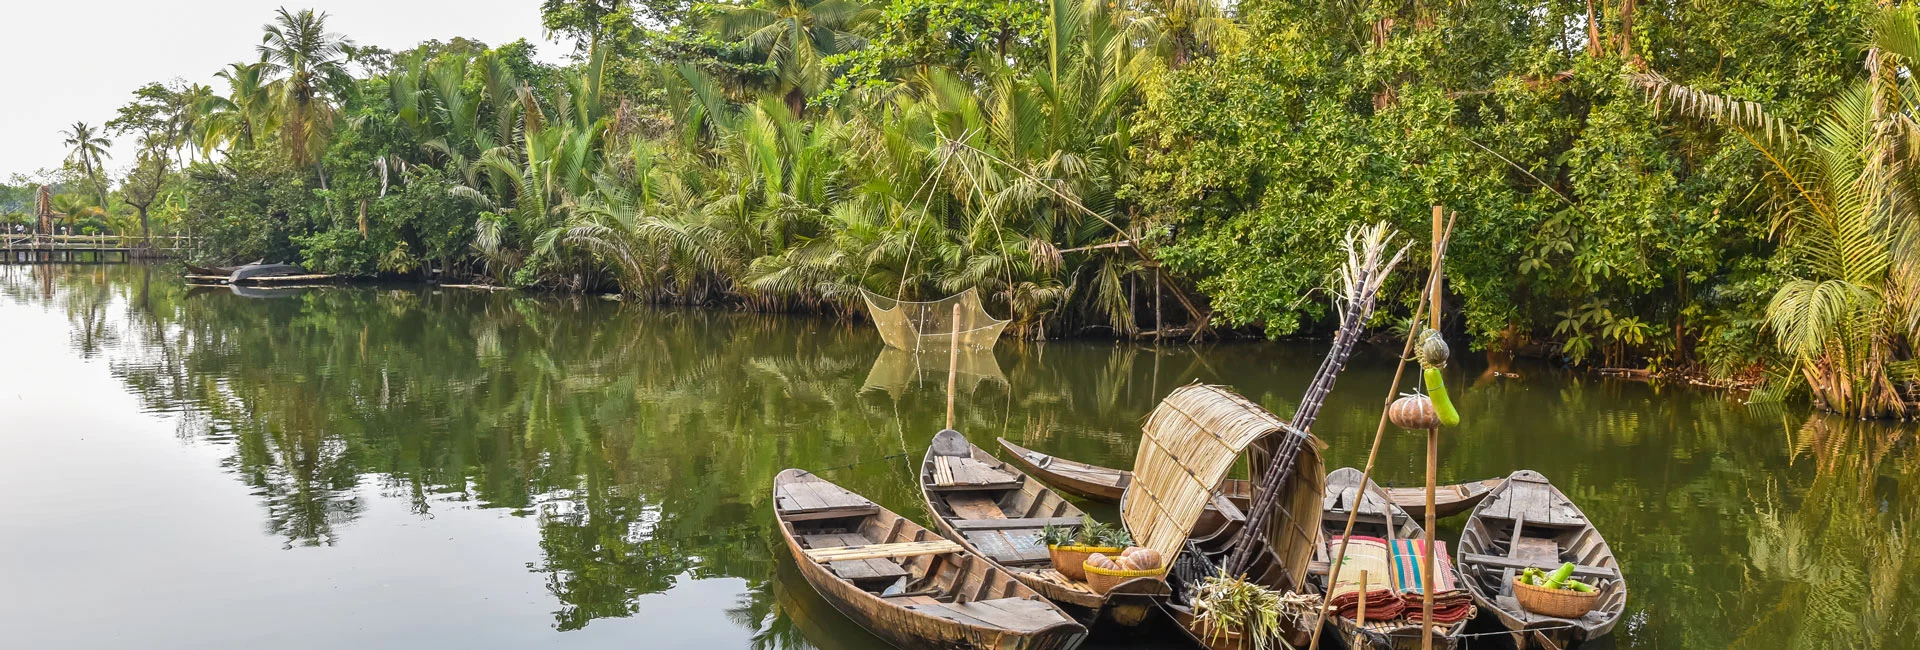 Mekong Delta Tours from Ho Chi Minh to Paradise of Phu Quoc island